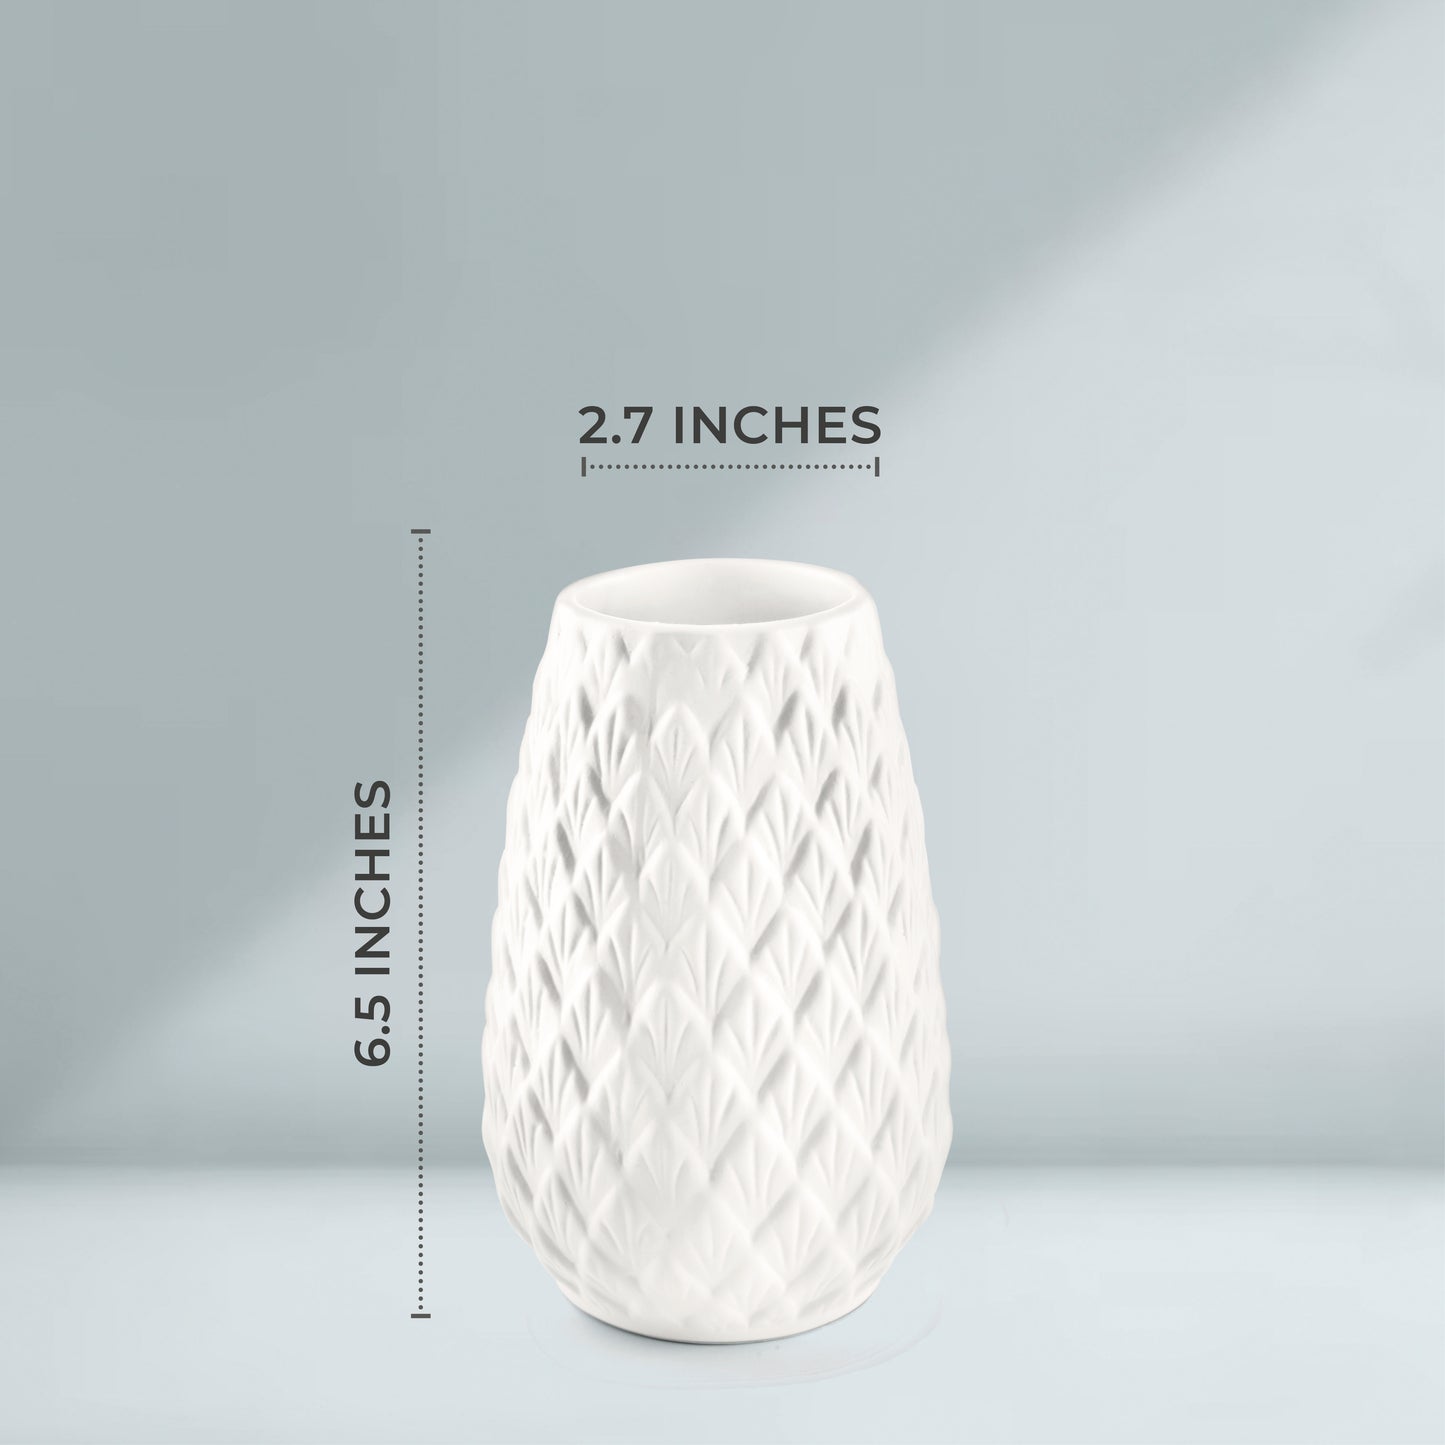 LuxeLane 'Pineapple Vase' for Home Decor - White Gloss, 6 inches, Pack of 1